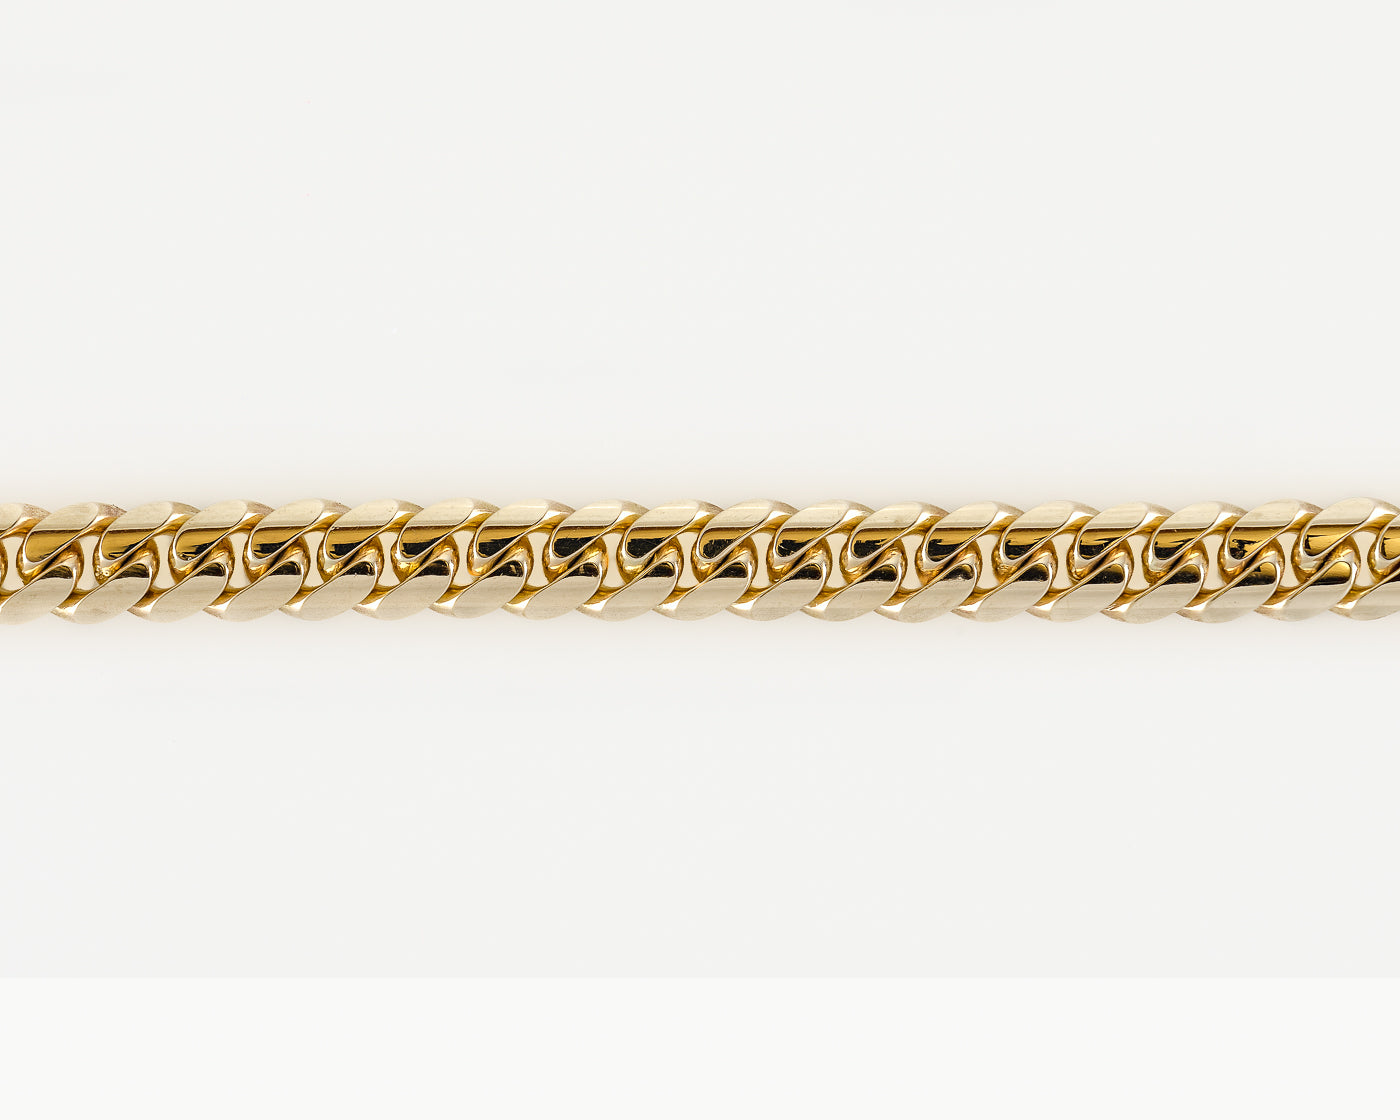 Macy's Cuban Chain Bracelet in 14K Gold - Yellow Gold - 9 Inches